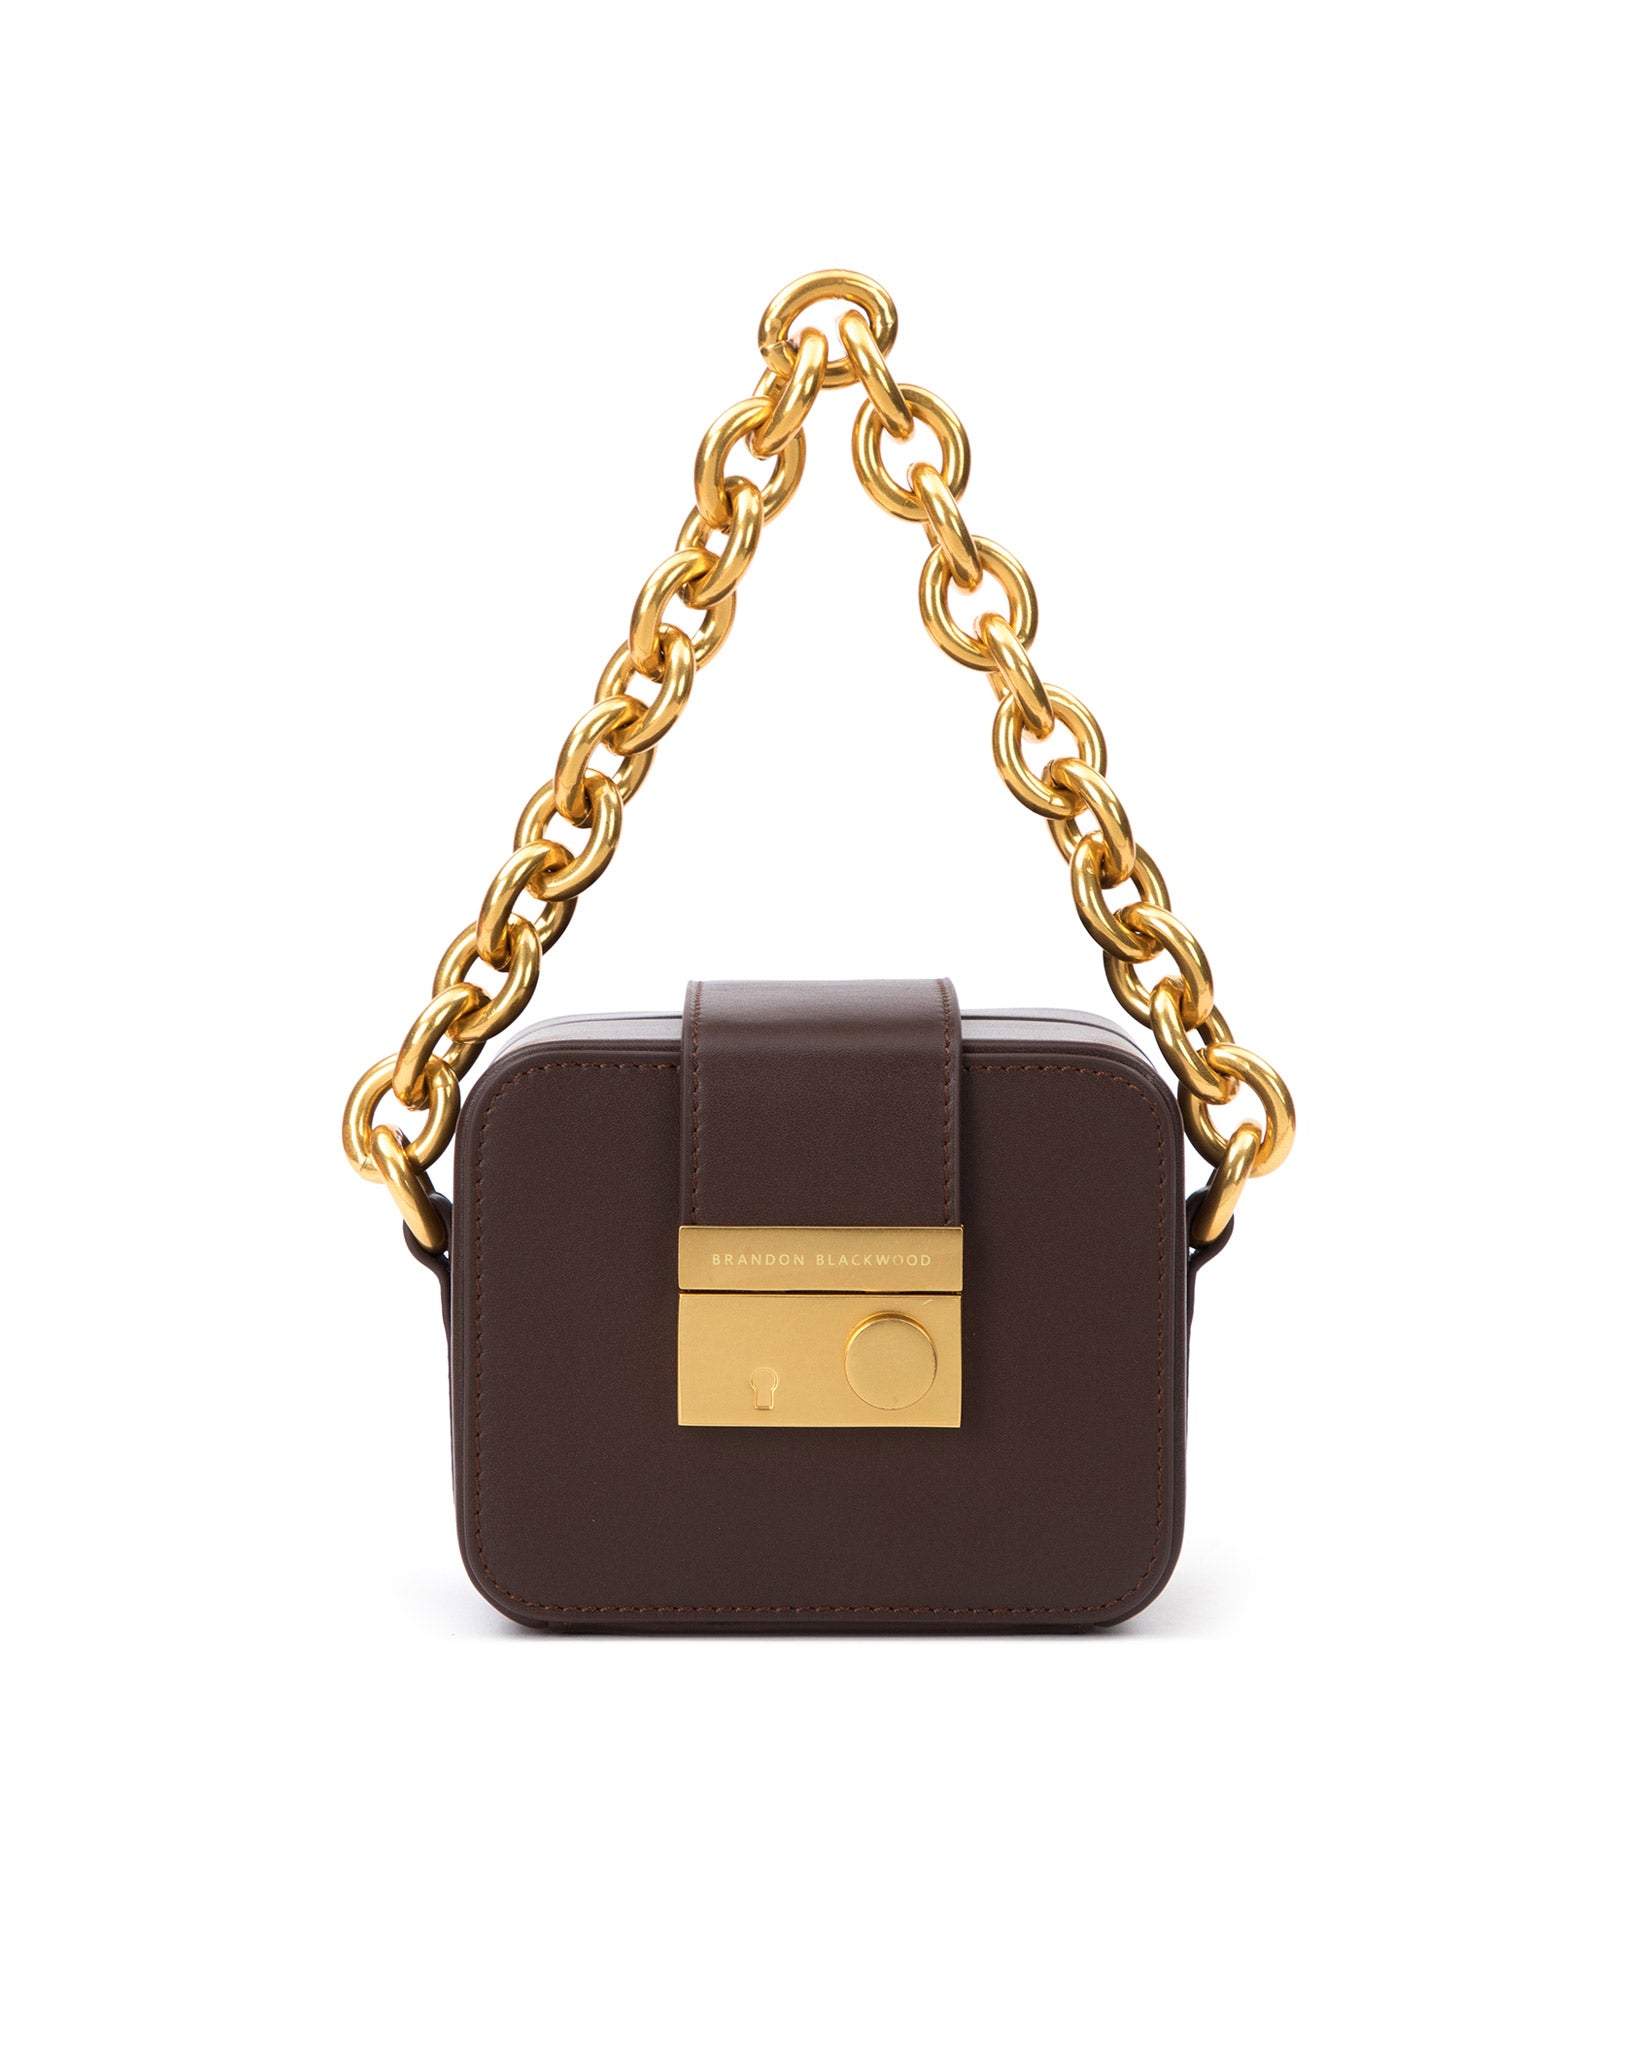 Burberry The Small Buckle Tote in Two-Tone Leather